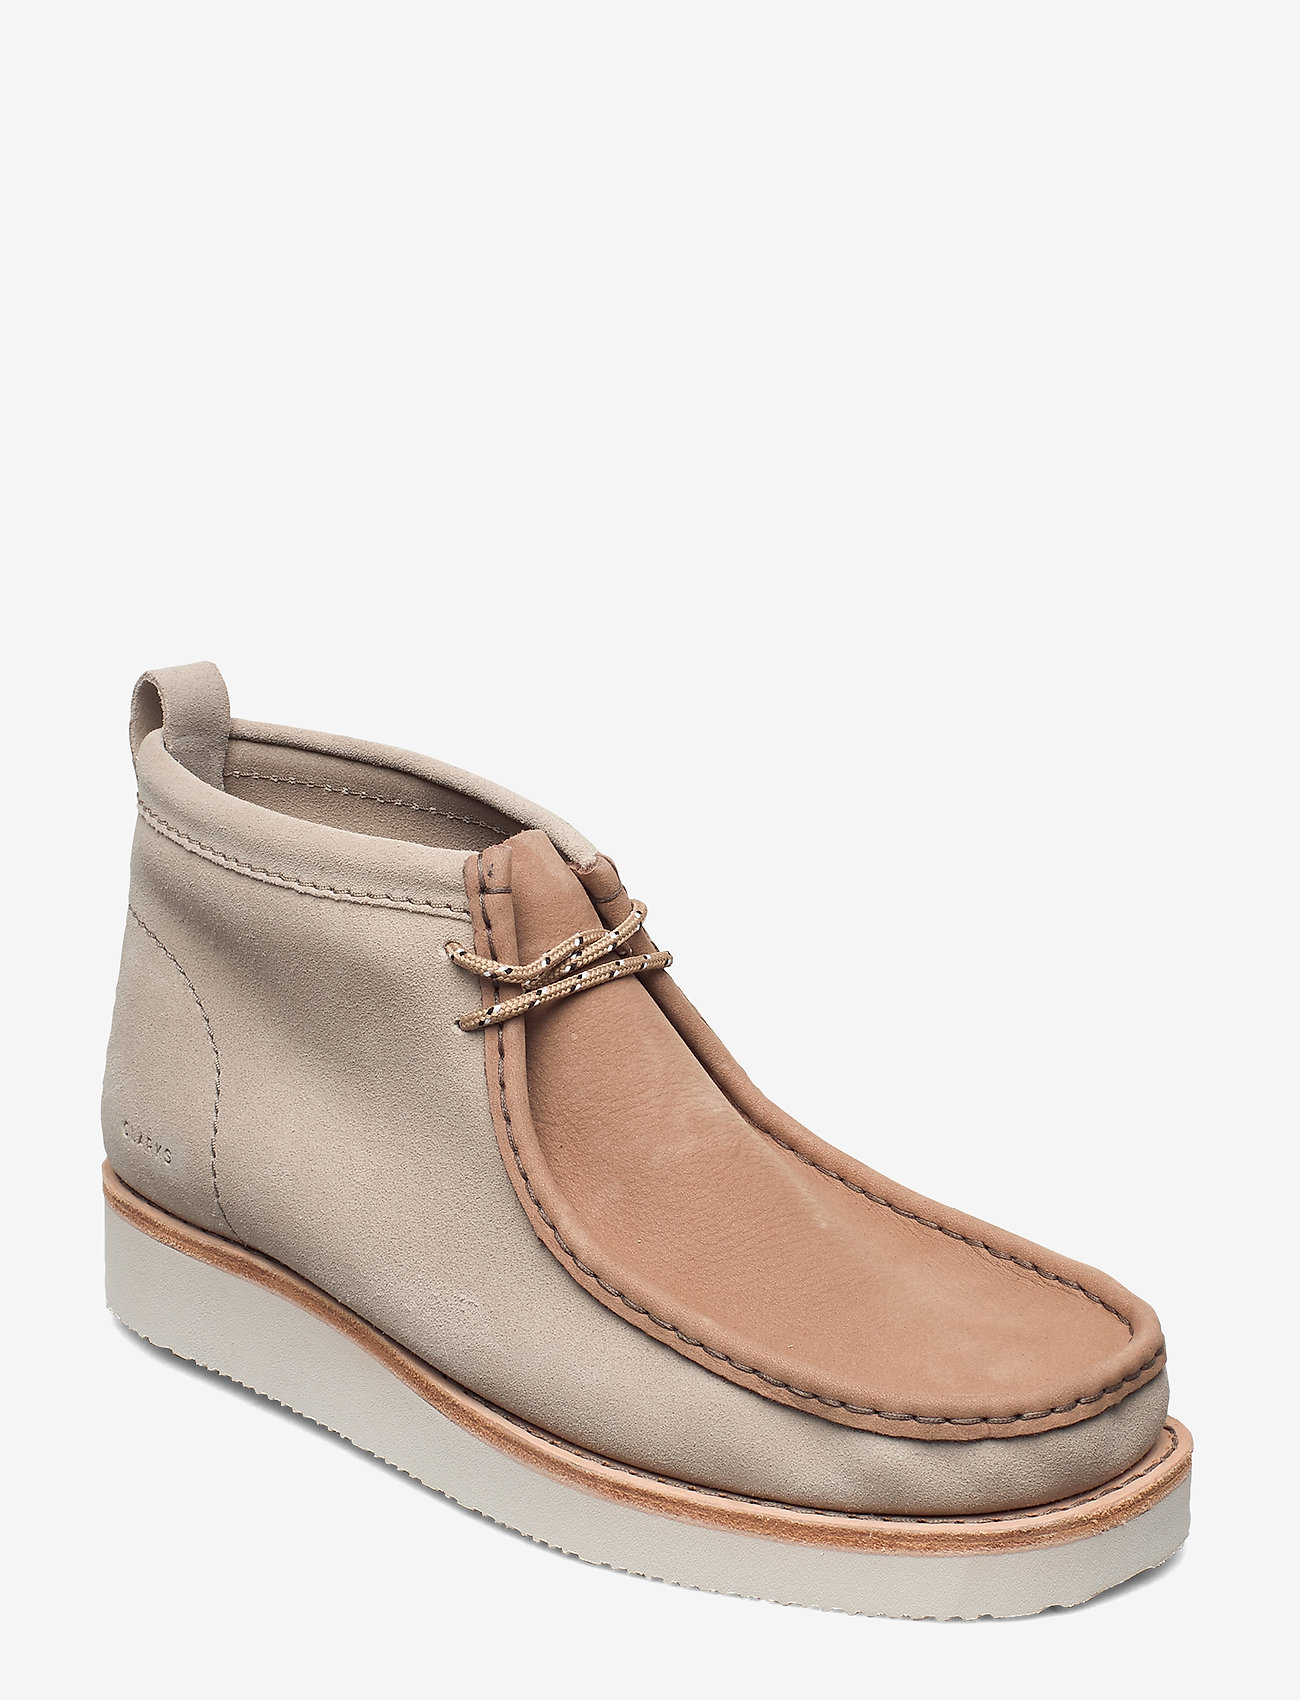 sand suede wallabees